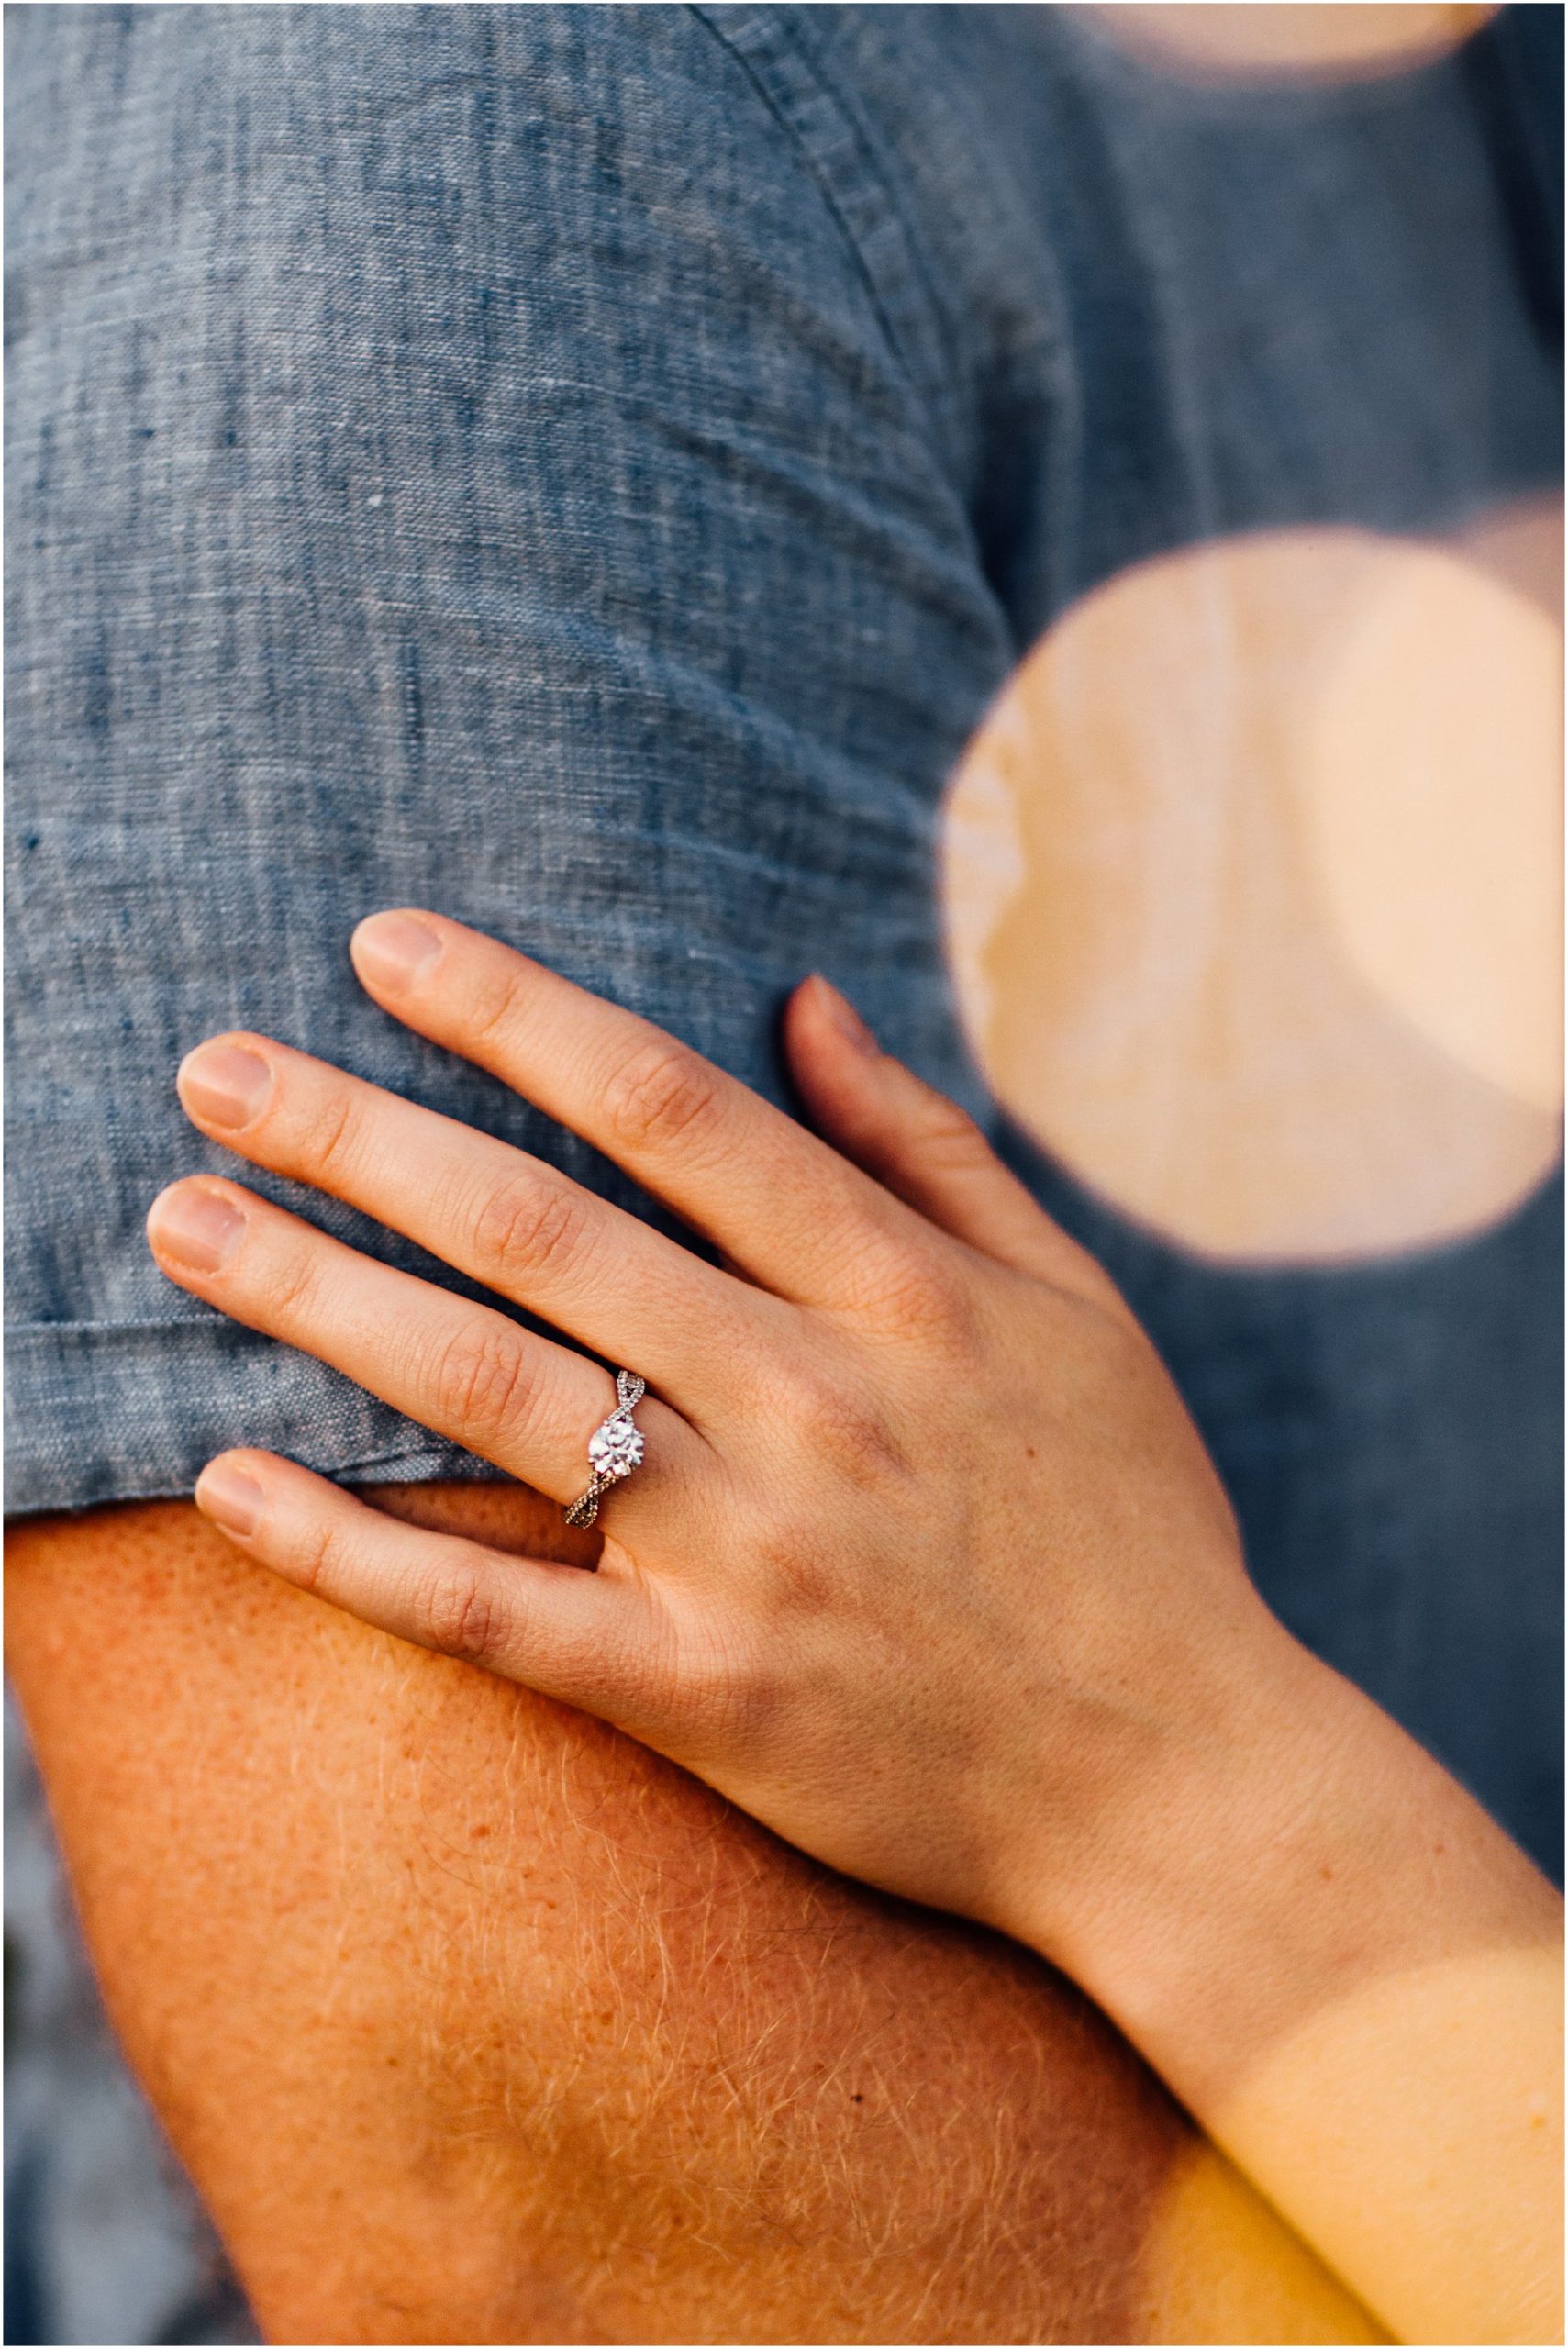 Beautiful engagement ring resting on fiancé's arm